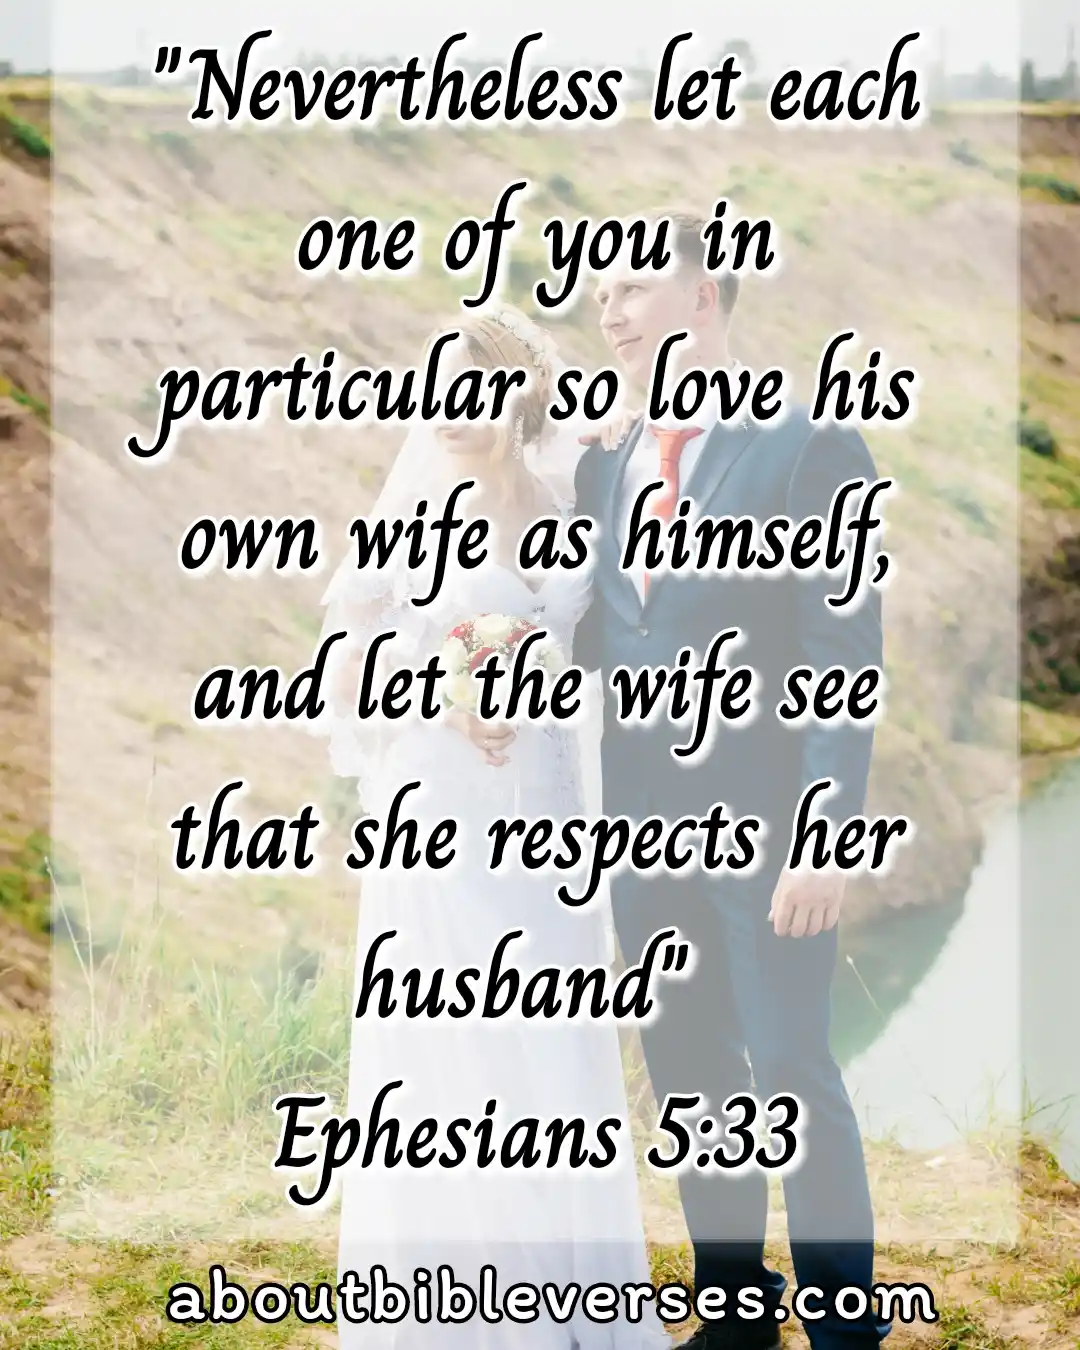 Bible Verses About A Healthy Marriage (Ephesians 5:33)